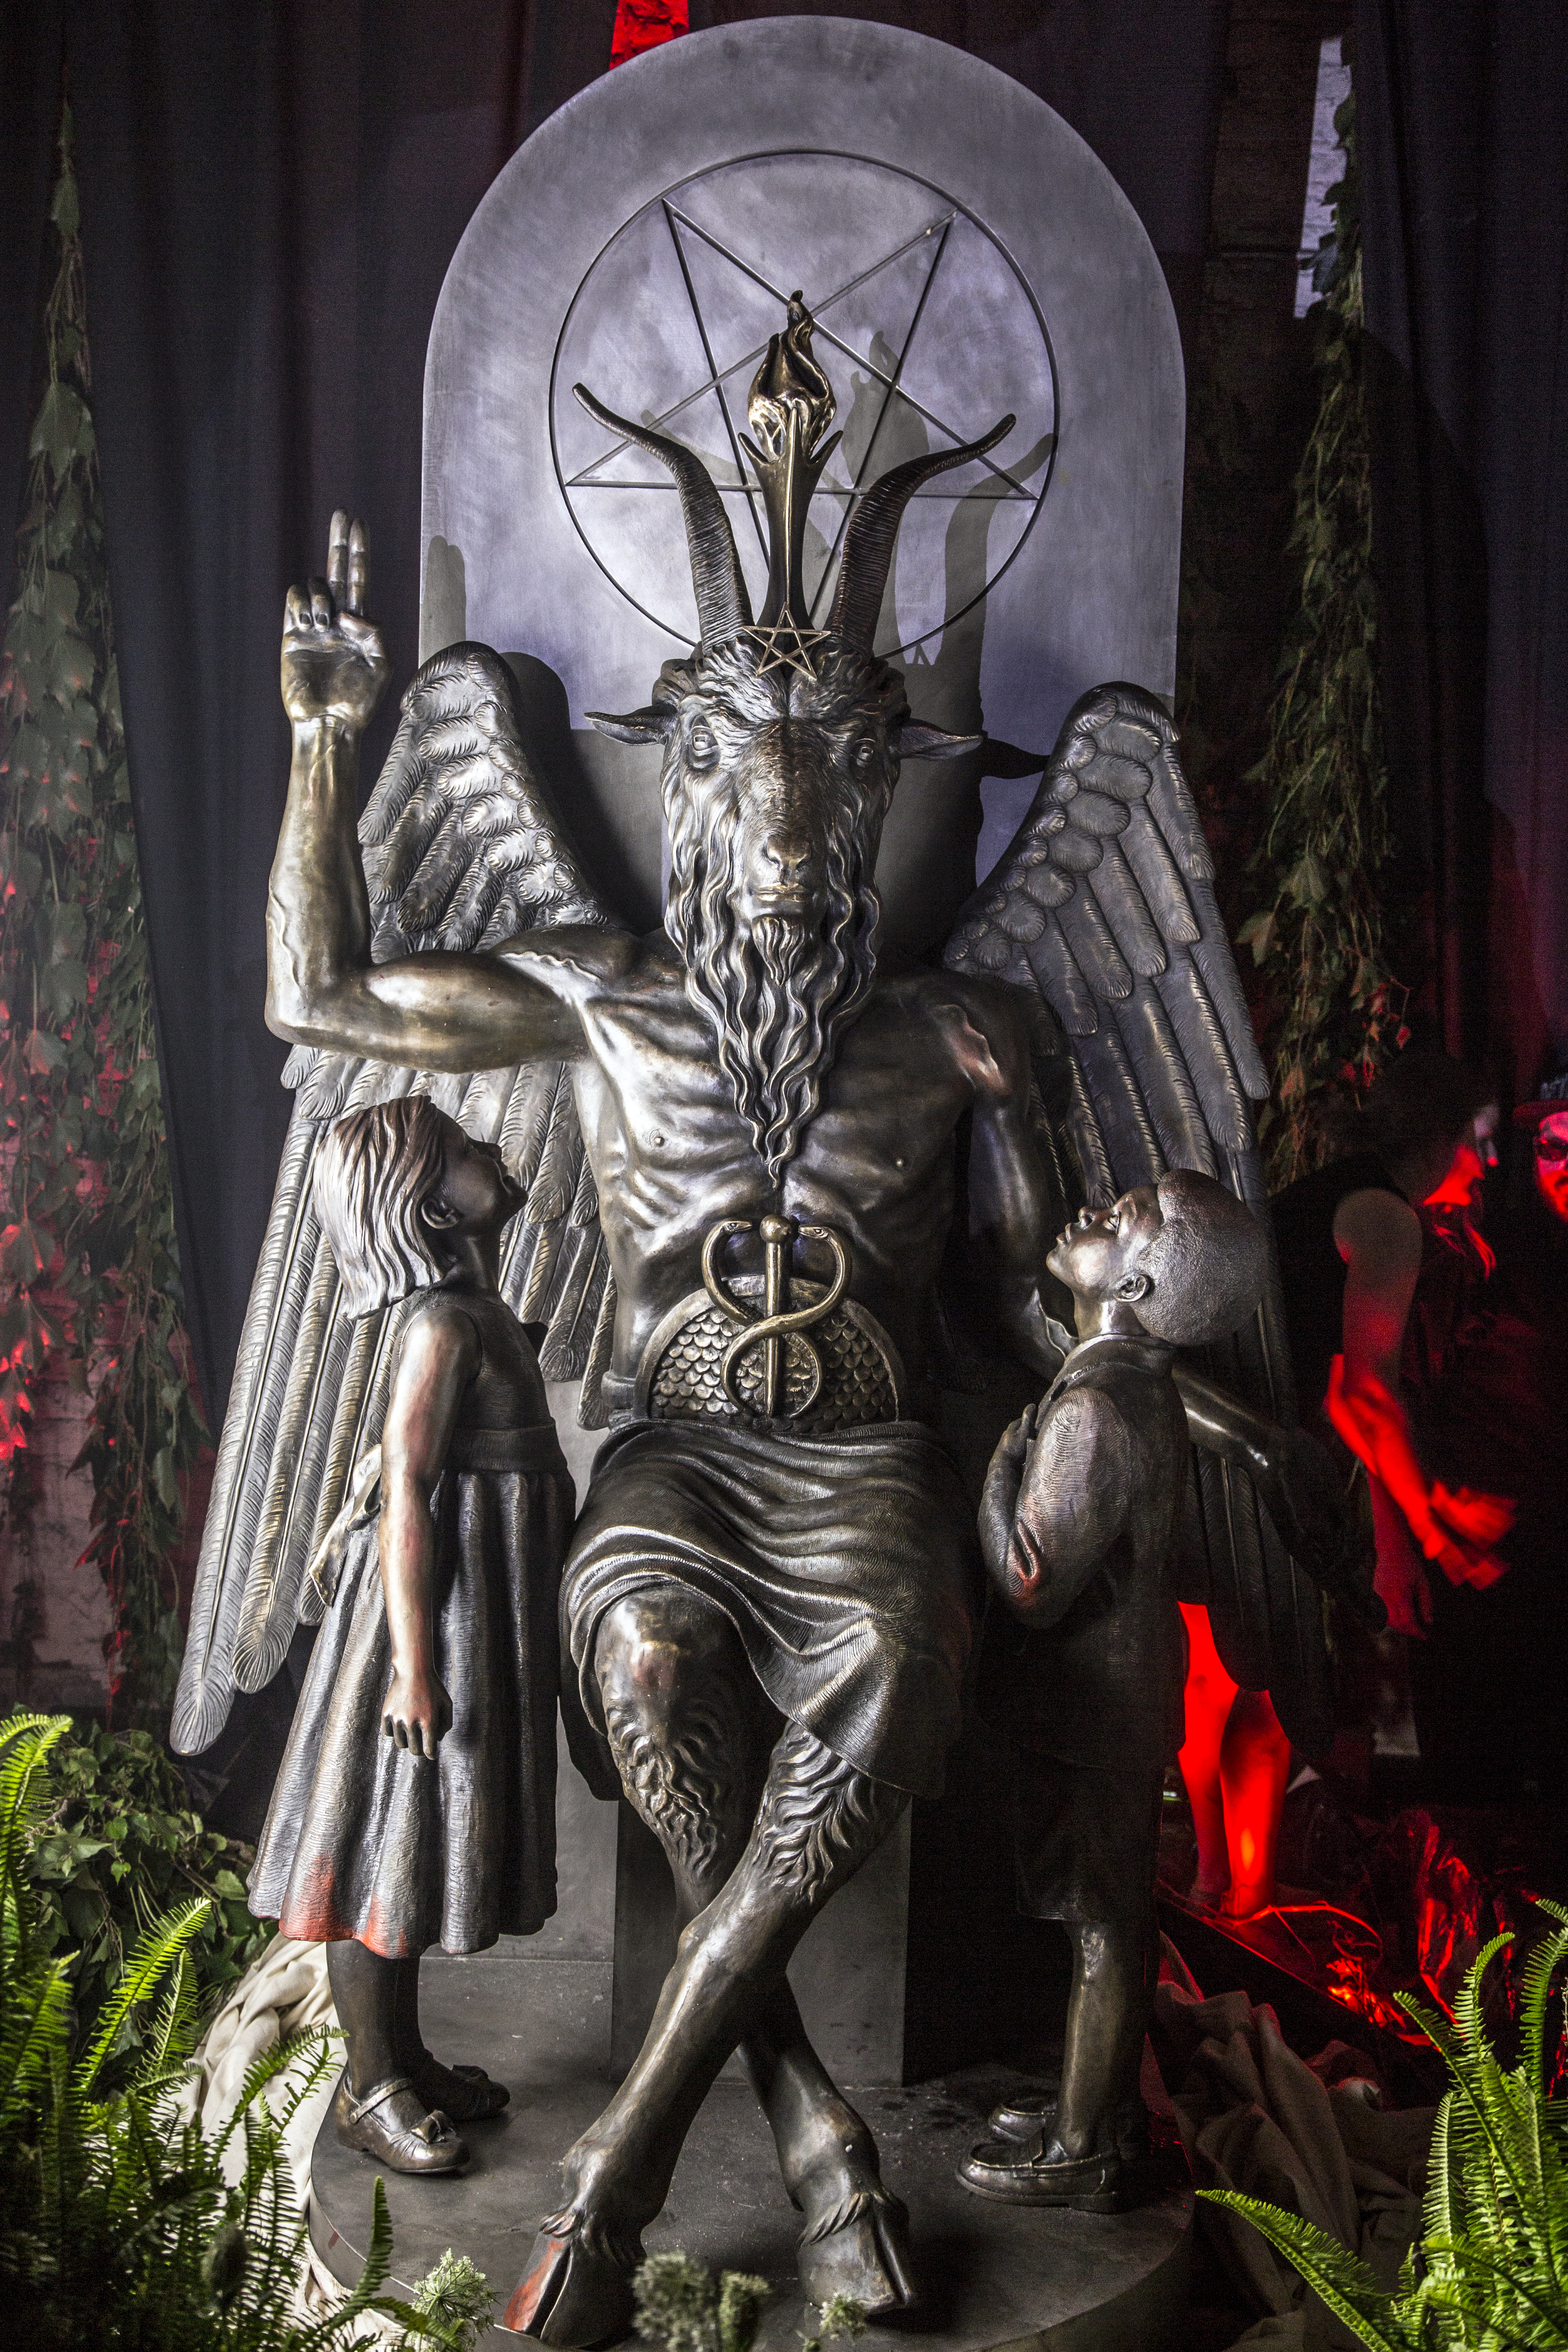 The bronze monument was unveiled by the Satanic Temple in Detroit on July 25, 2015 (Matt Anderson)